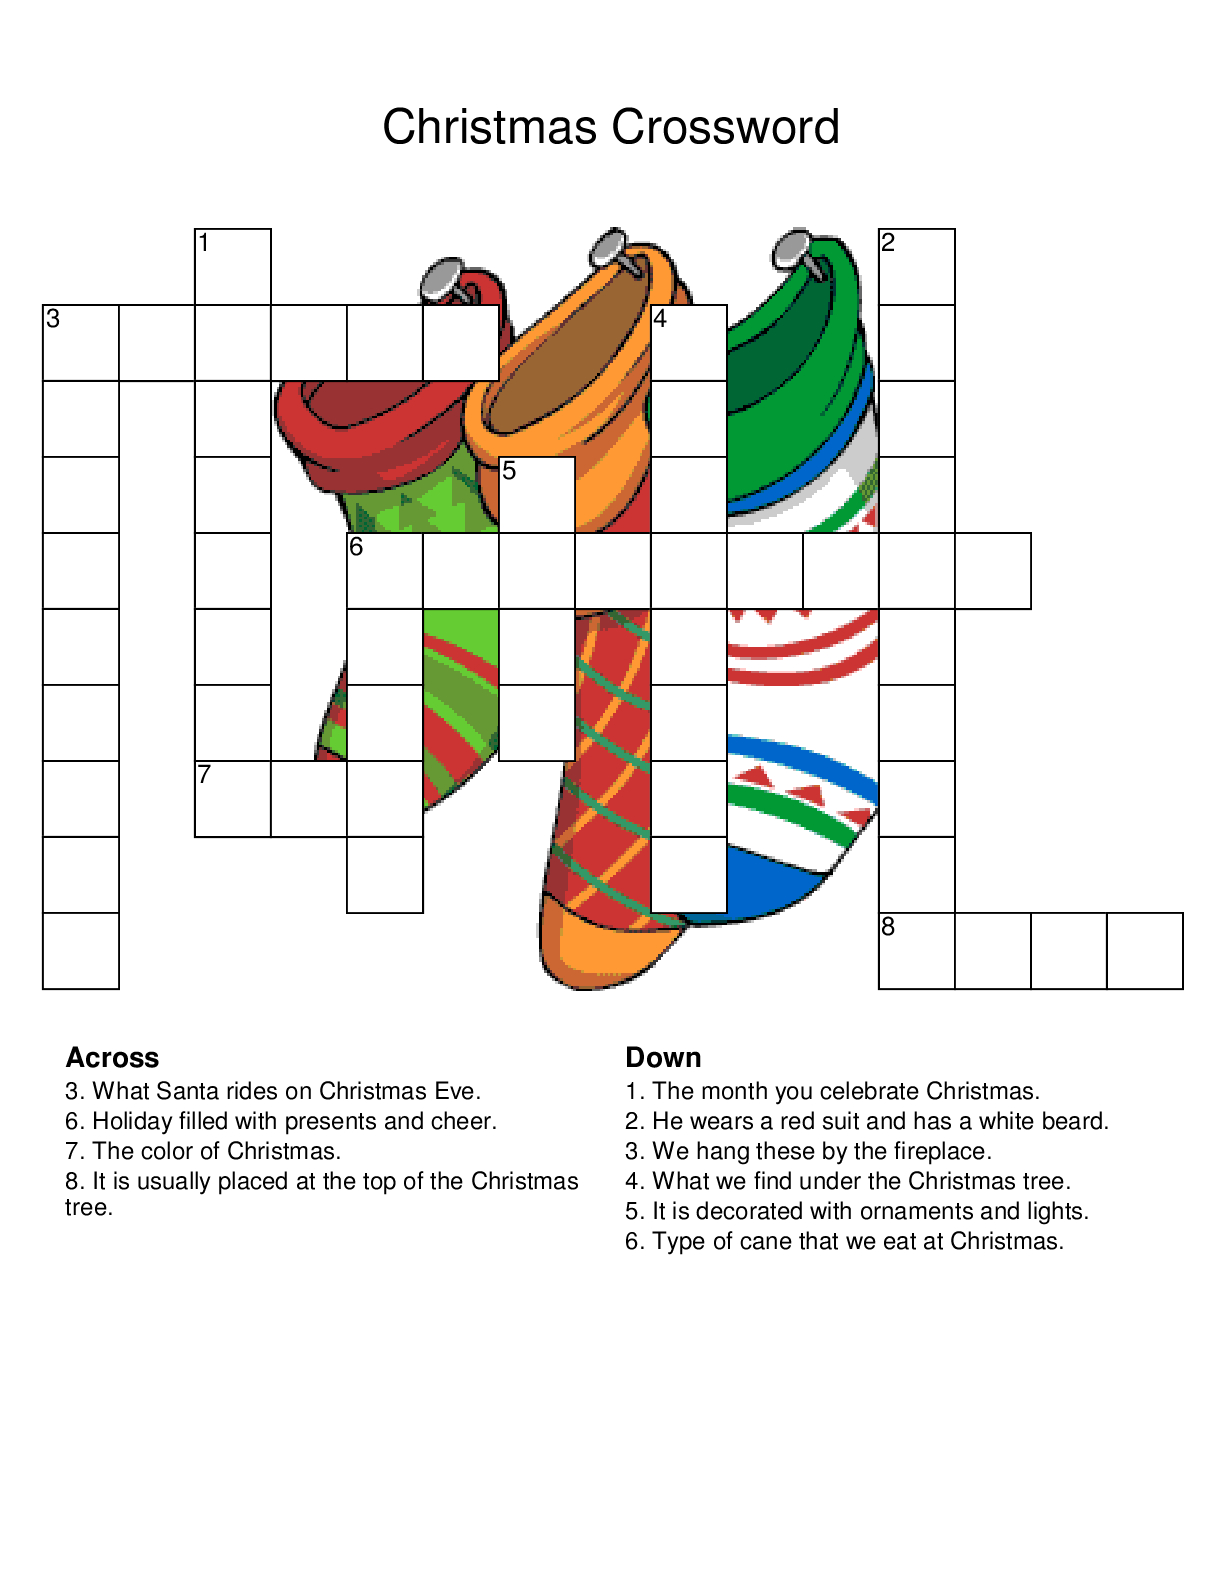 Christmas Crossword Puzzles - Best Coloring Pages For Kids - Printable Holiday Crossword Puzzles